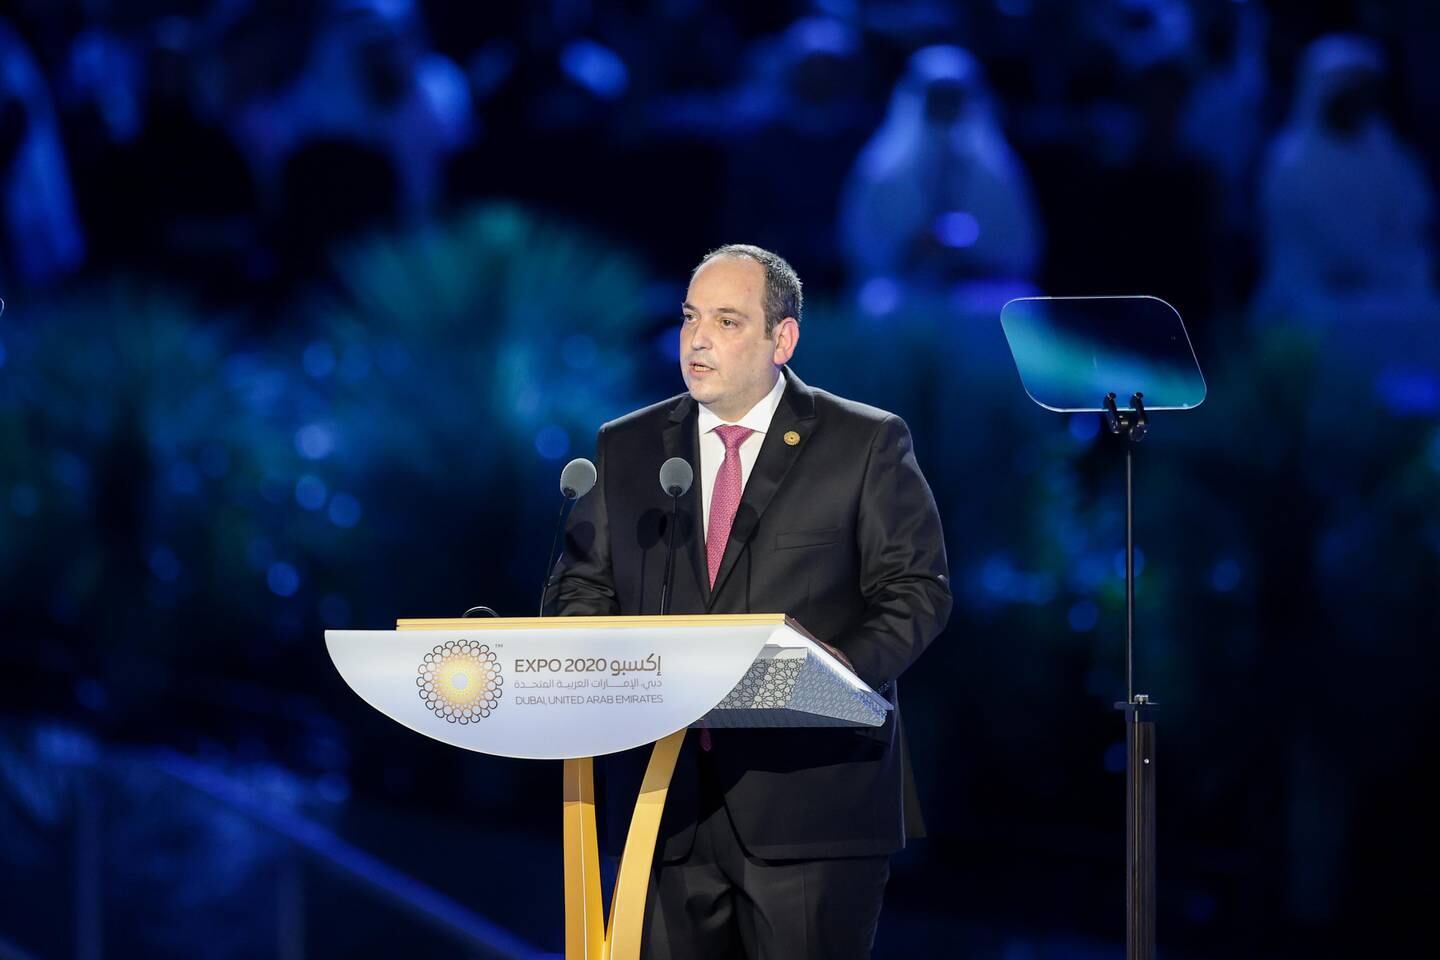 Dimitri Kerkentzes, secretary general of the Bureau International des Expositions, said more countries in the Middle East and Africa are inquiring about hosting the world's fair.  Expo 2020 Dubai